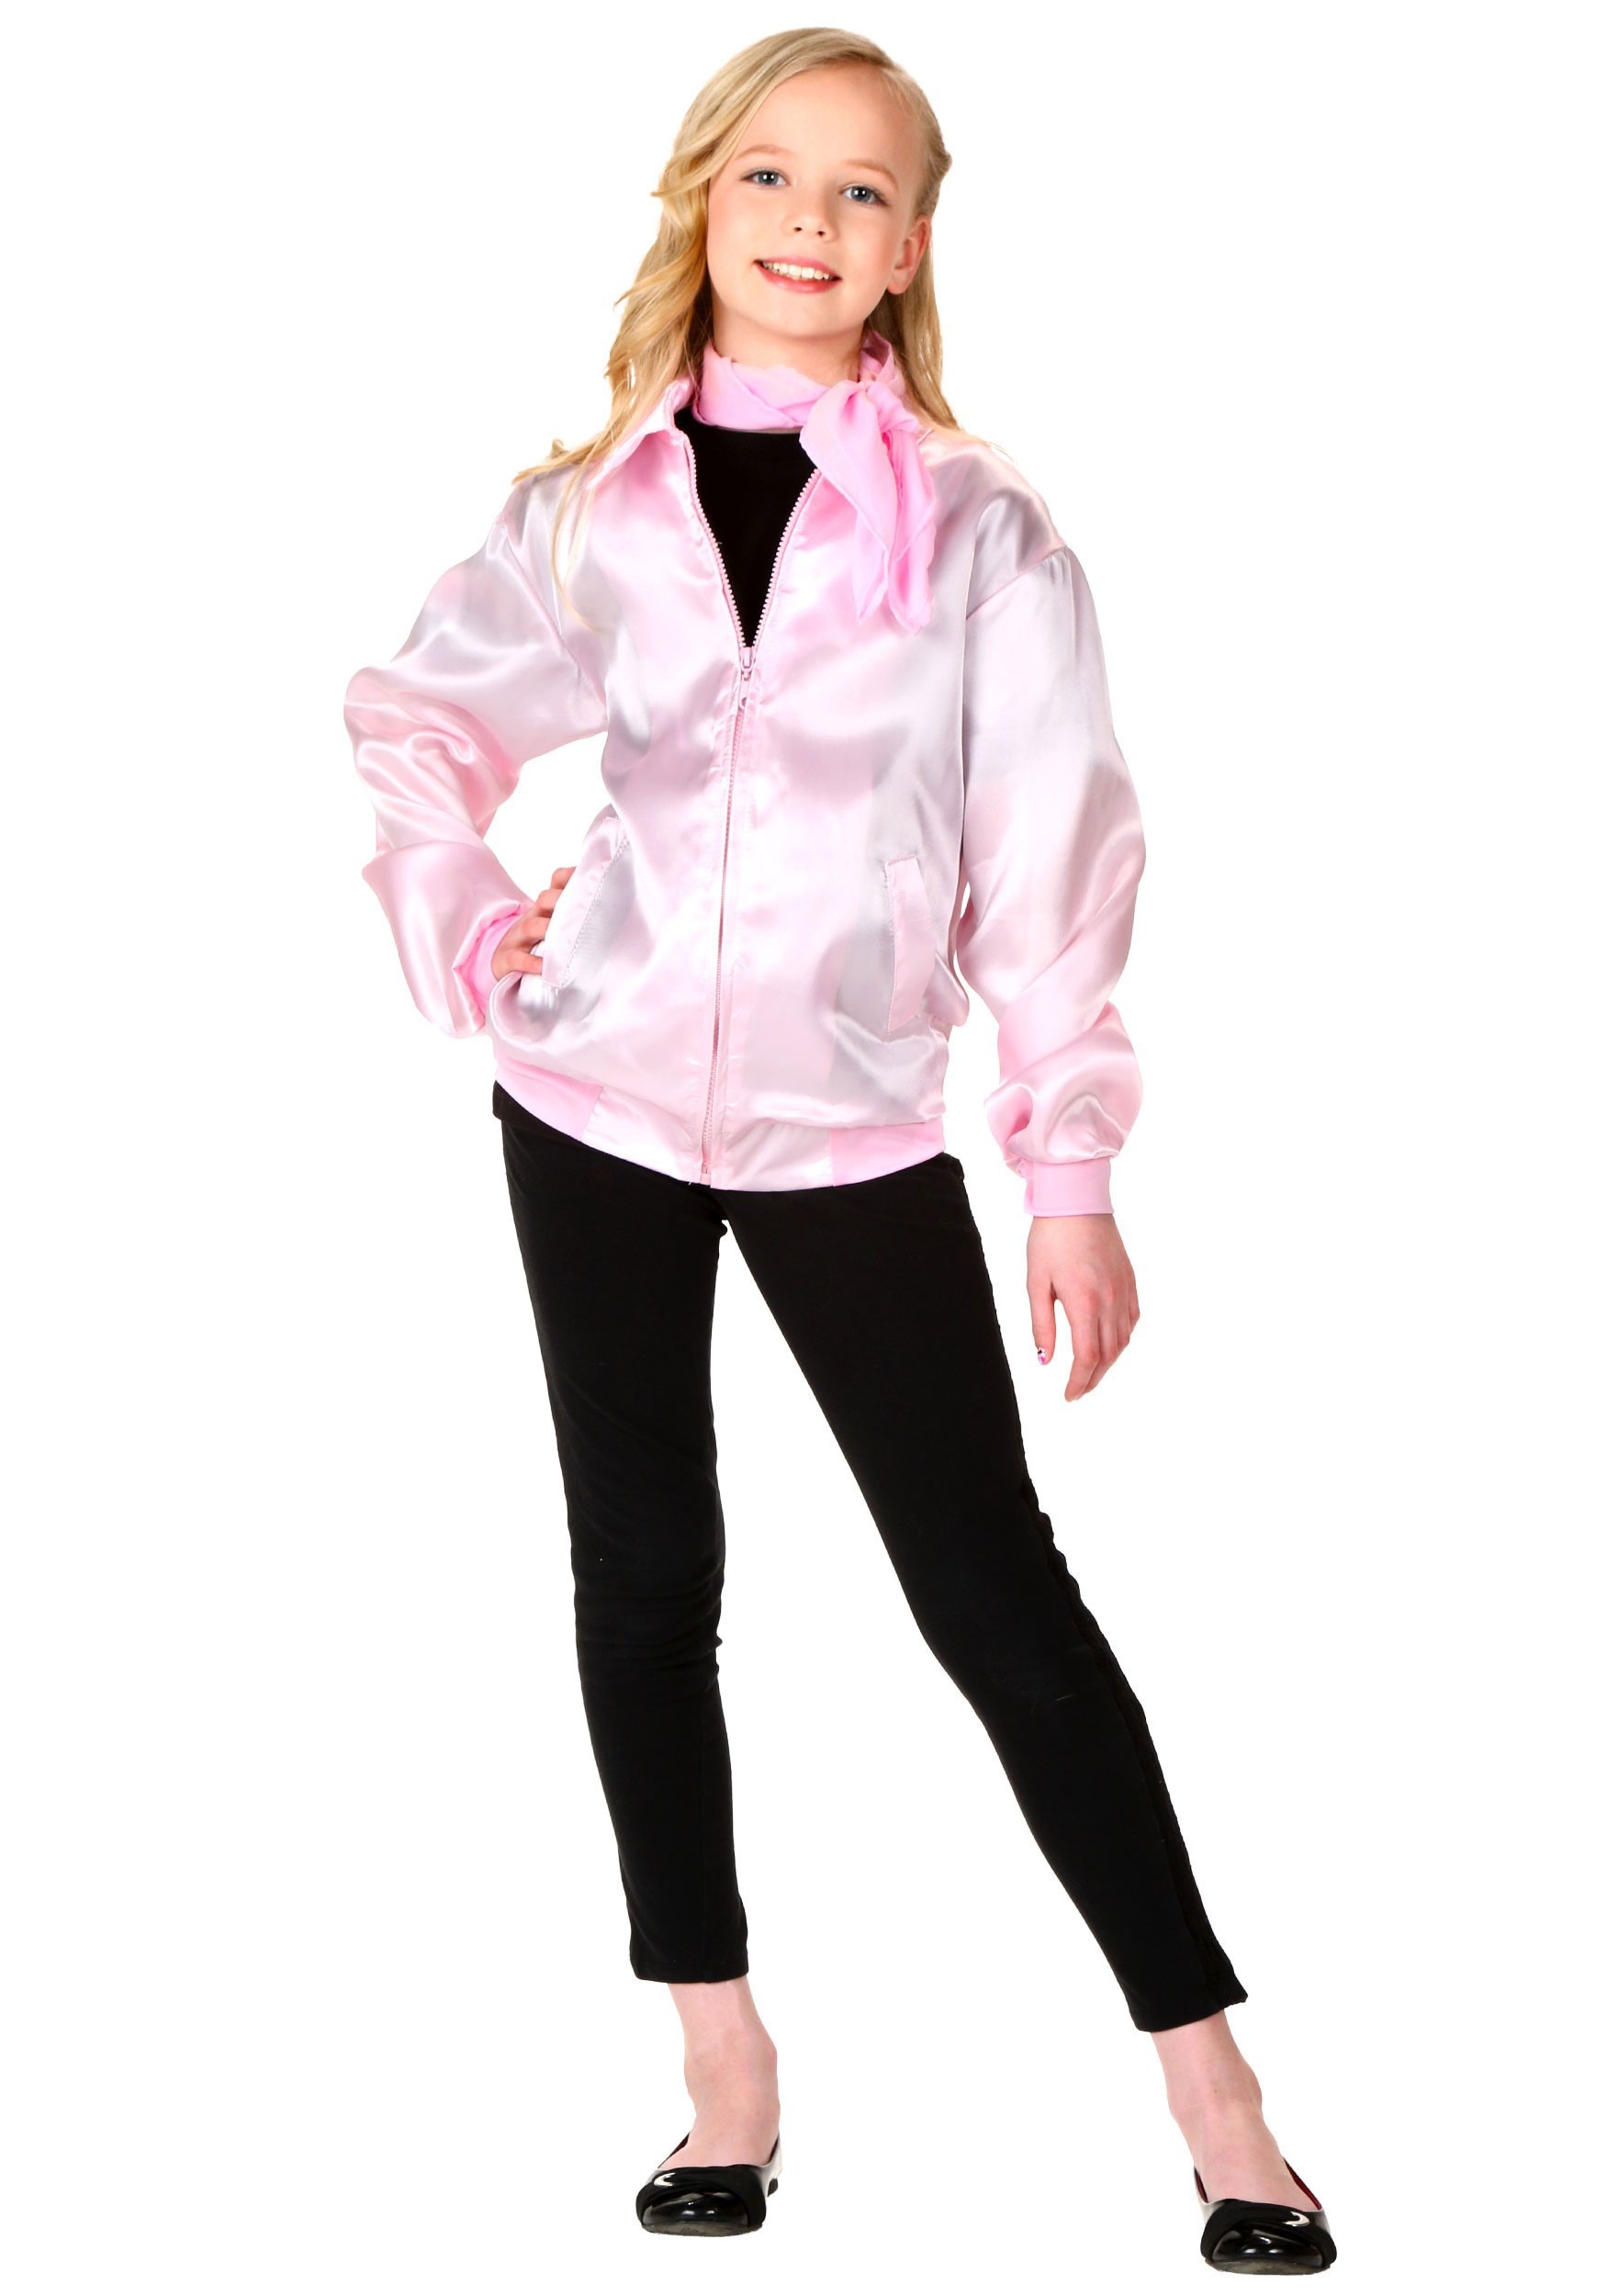 Photos - Fancy Dress FUN Costumes Kids Grease Pink Ladies Costume Jacket Pink GRE6004CH